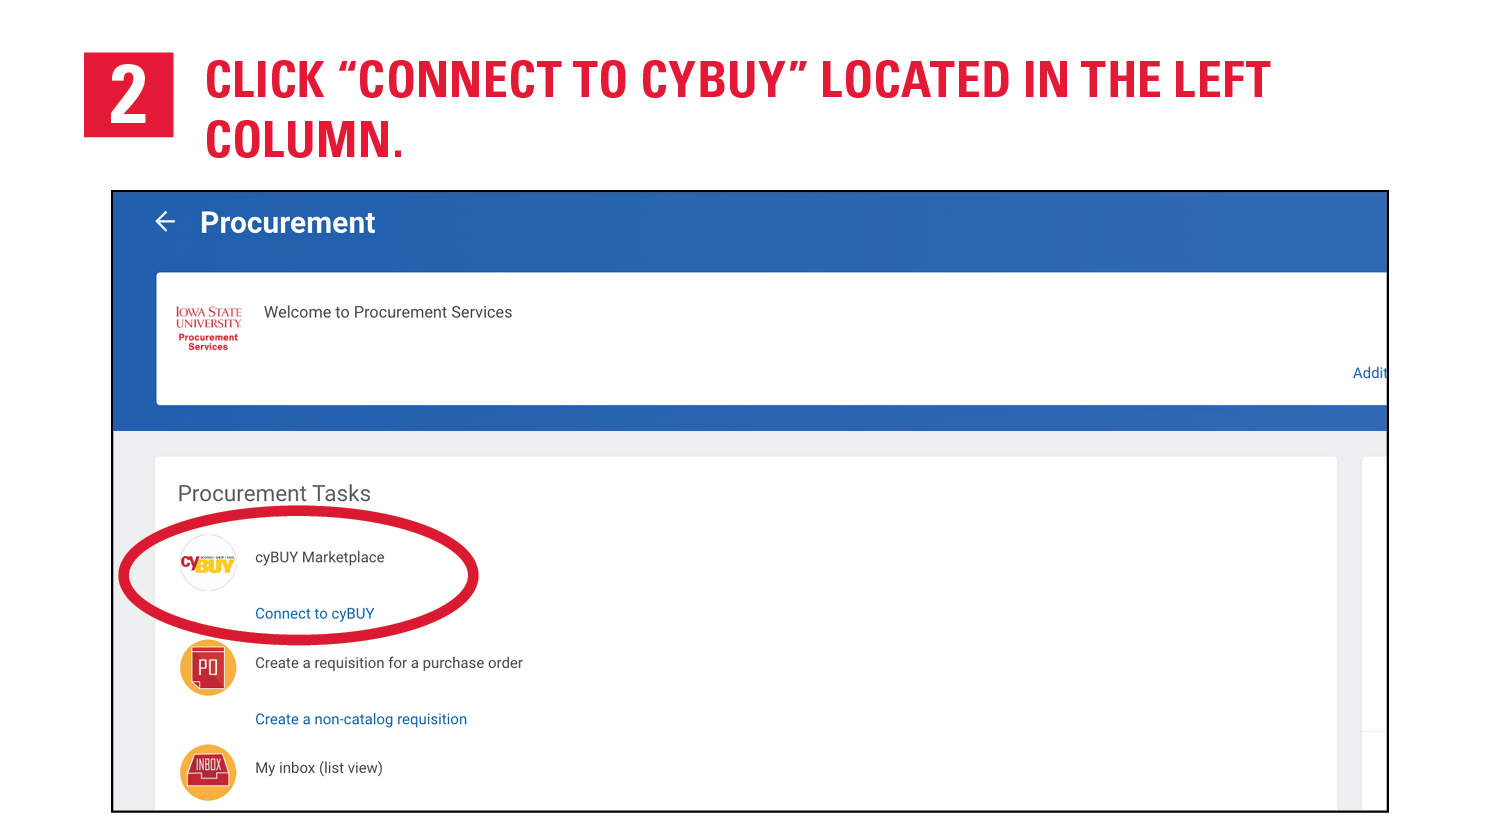 2. Click "Connect to cyBUY" located in the left column.